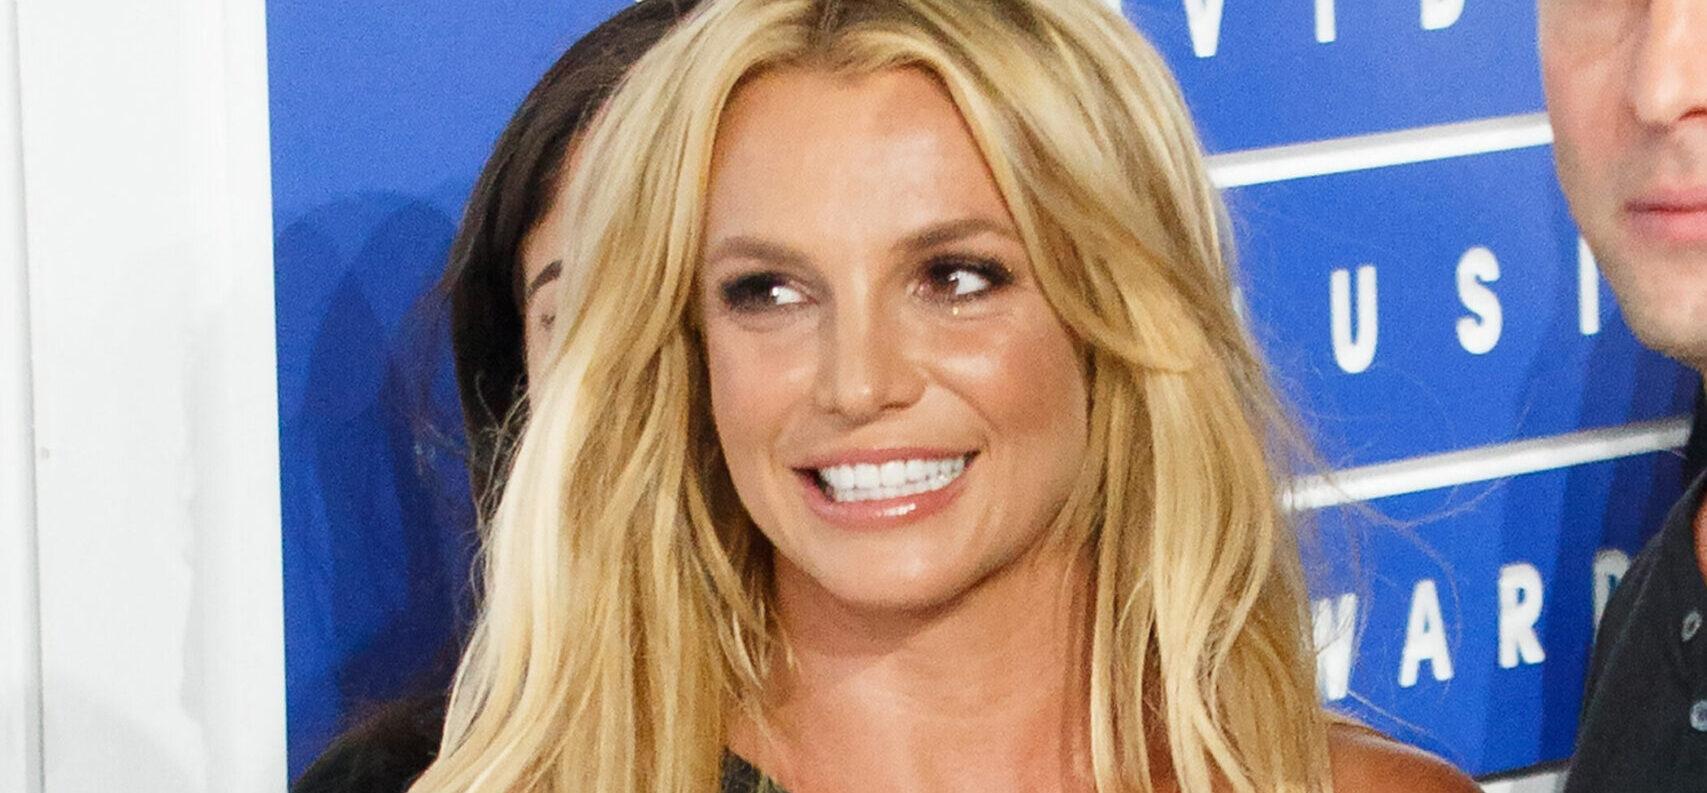 Britney Spears Fans Express Concern After Spotting Used Bandage On The Floor